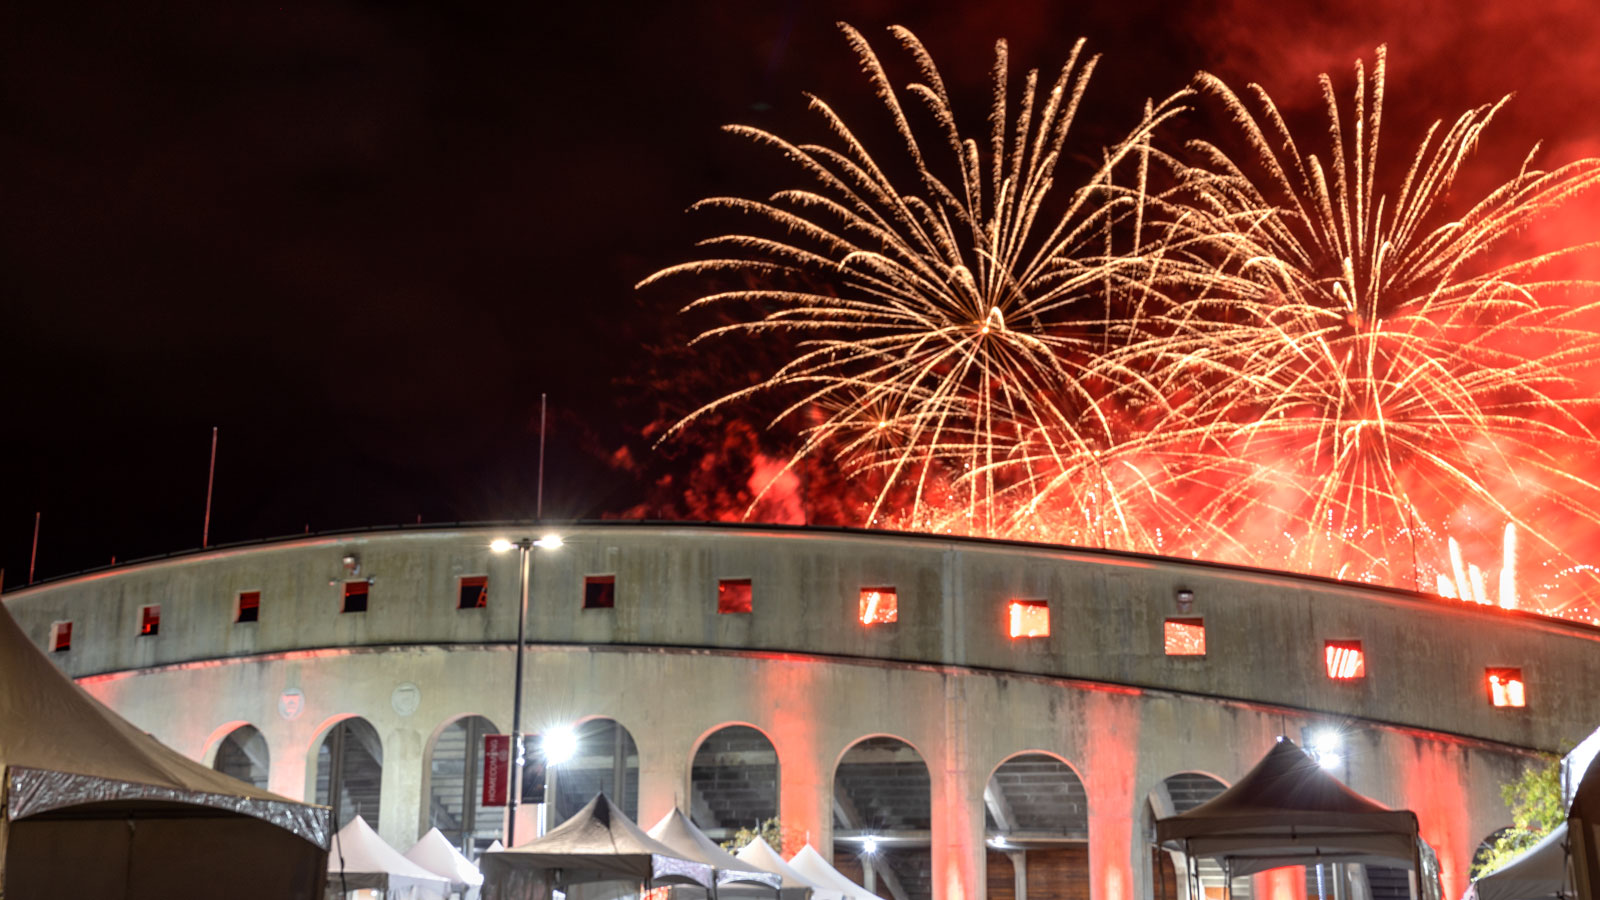 The Homecoming fireworks display is visible above Schoellkopf Stadium